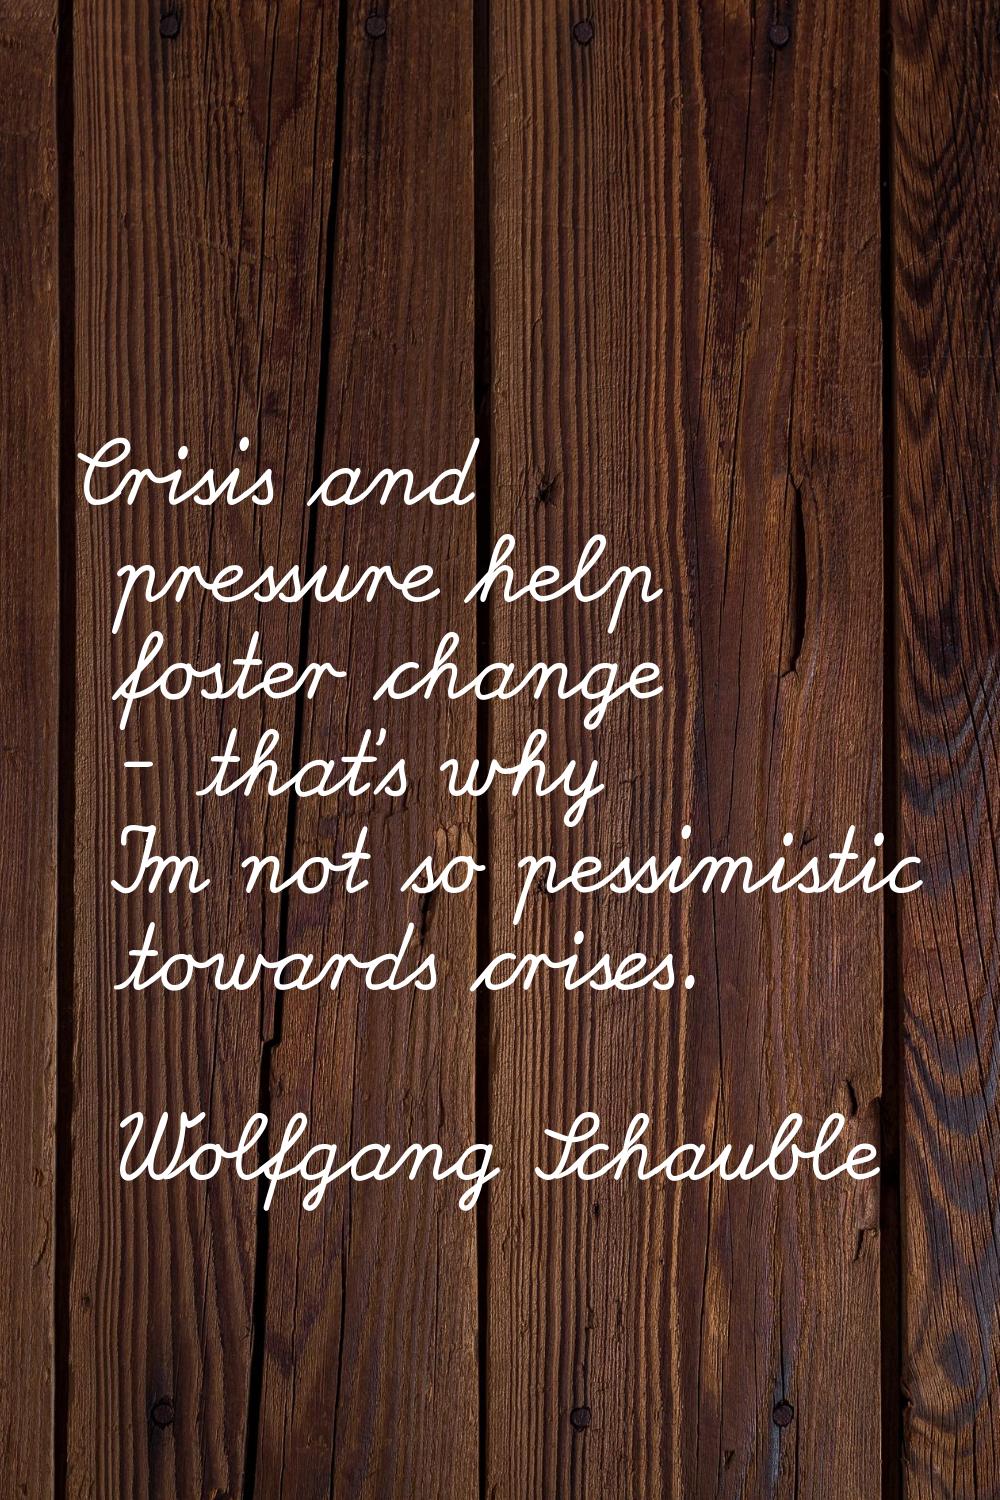 Crisis and pressure help foster change - that's why I'm not so pessimistic towards crises.